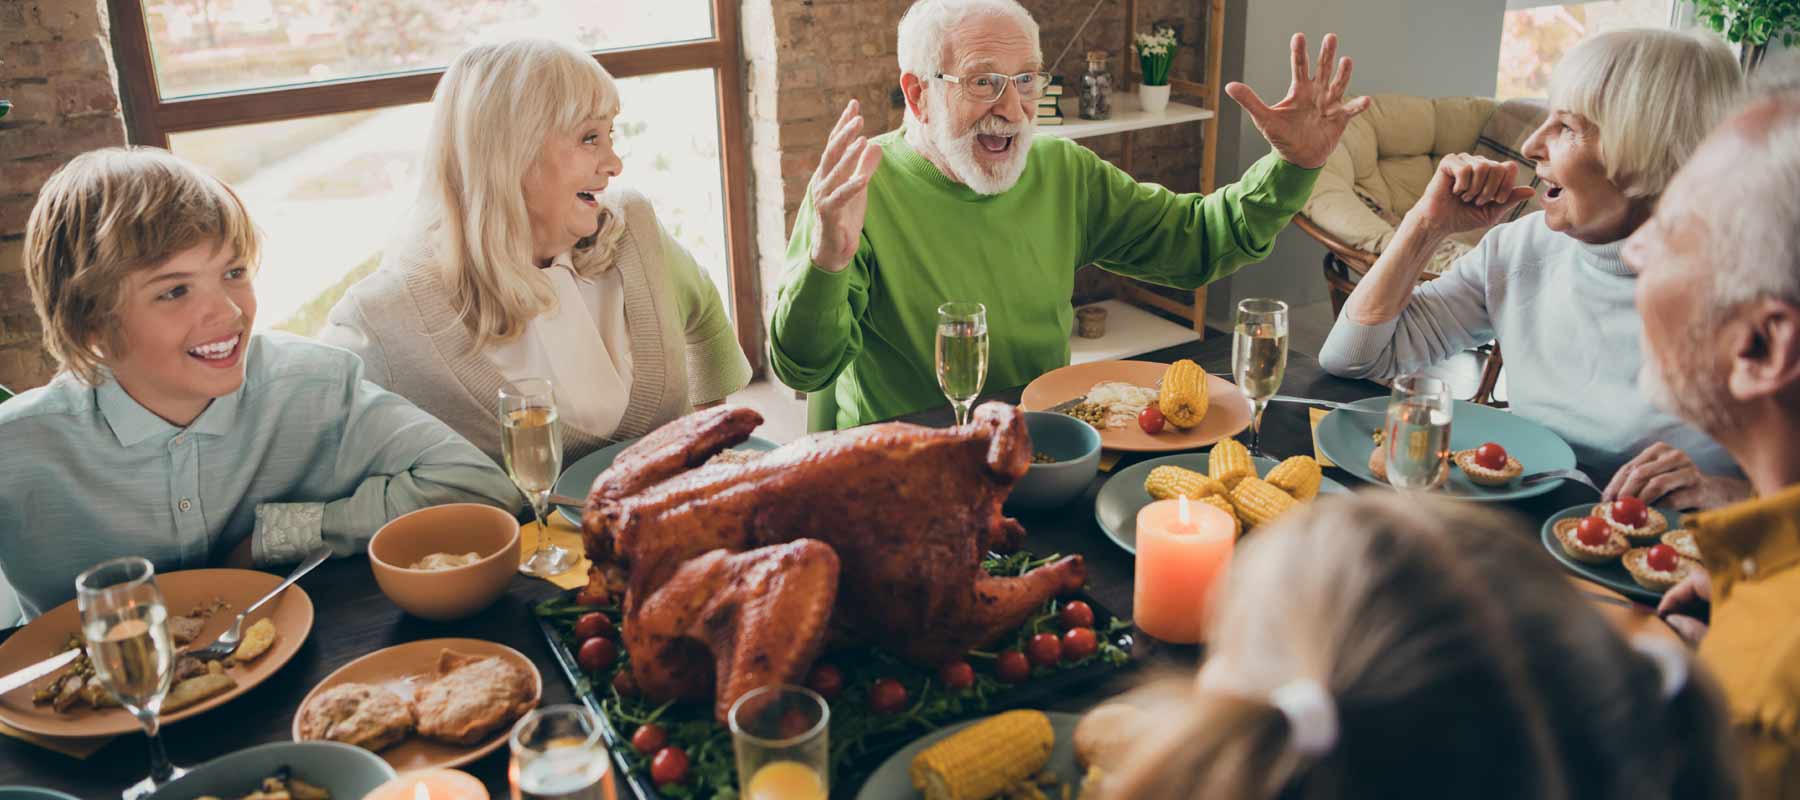 Does Your Thanksgiving Come with a Side of Drama? 8 Ways to Avert It.